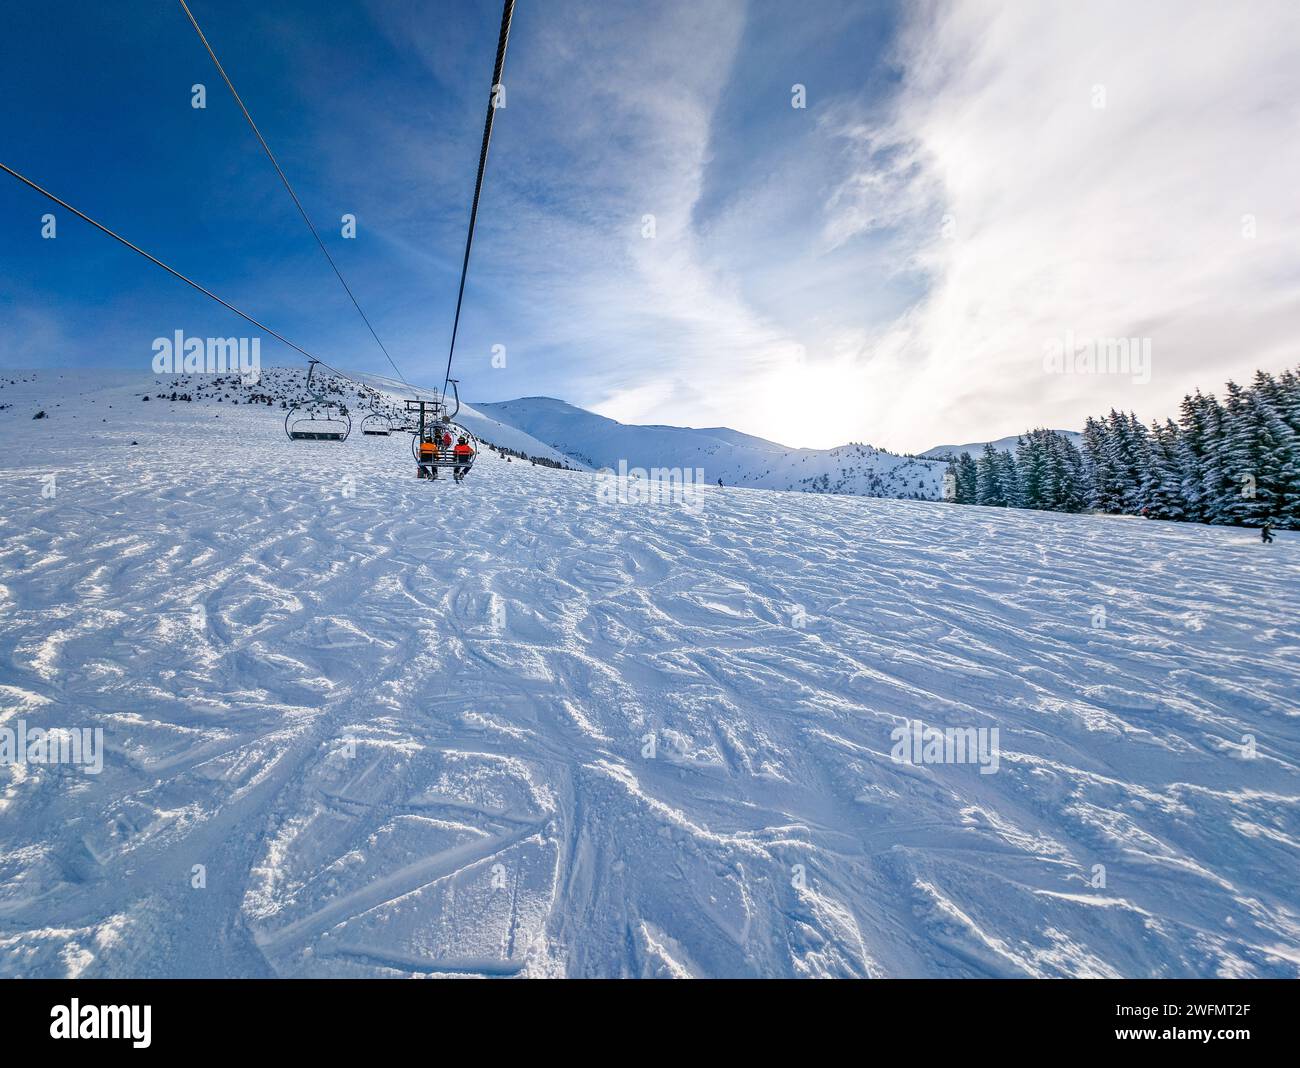 Winter skiing in Bellvue Saint-Gervais-les-Bains, Alps mountain, France. Stock Photo